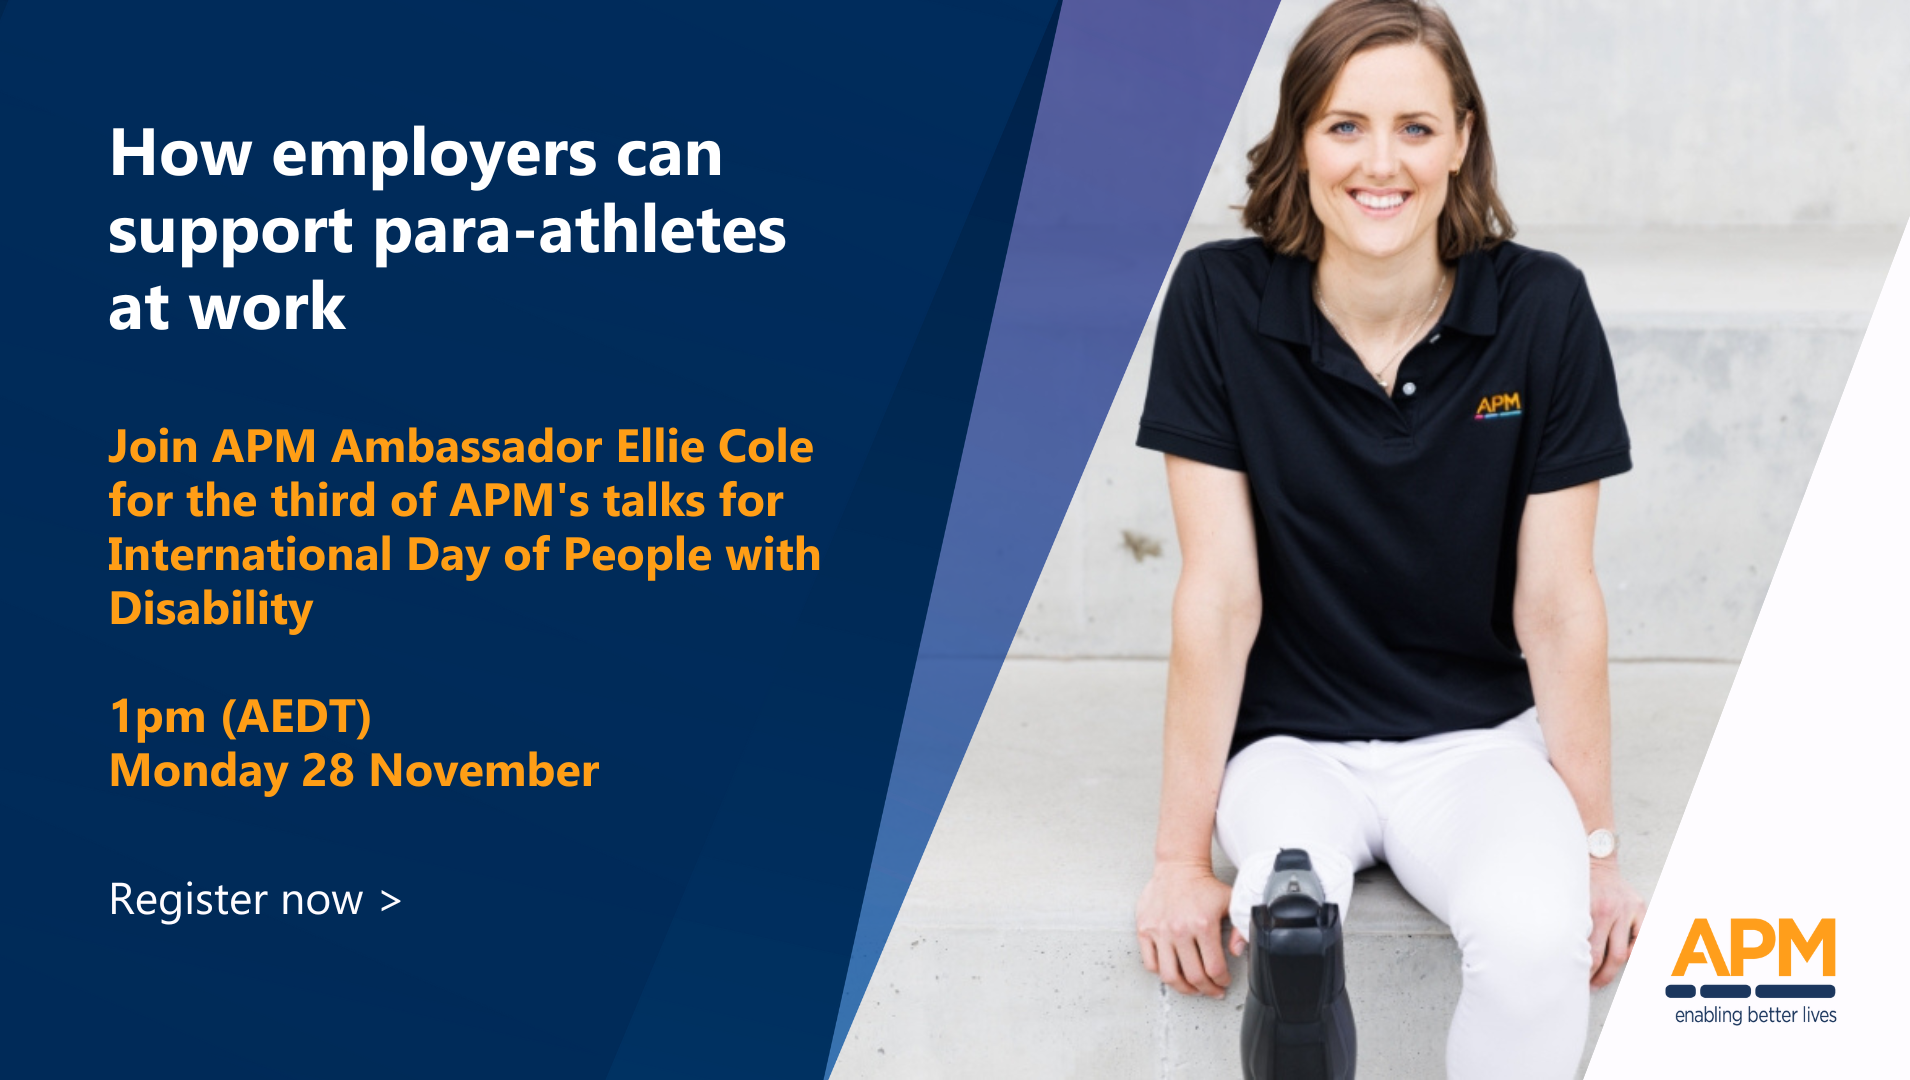 Webinar from Paralympian and APM Ambassador Ellie Cole OAM takes place on 28 November